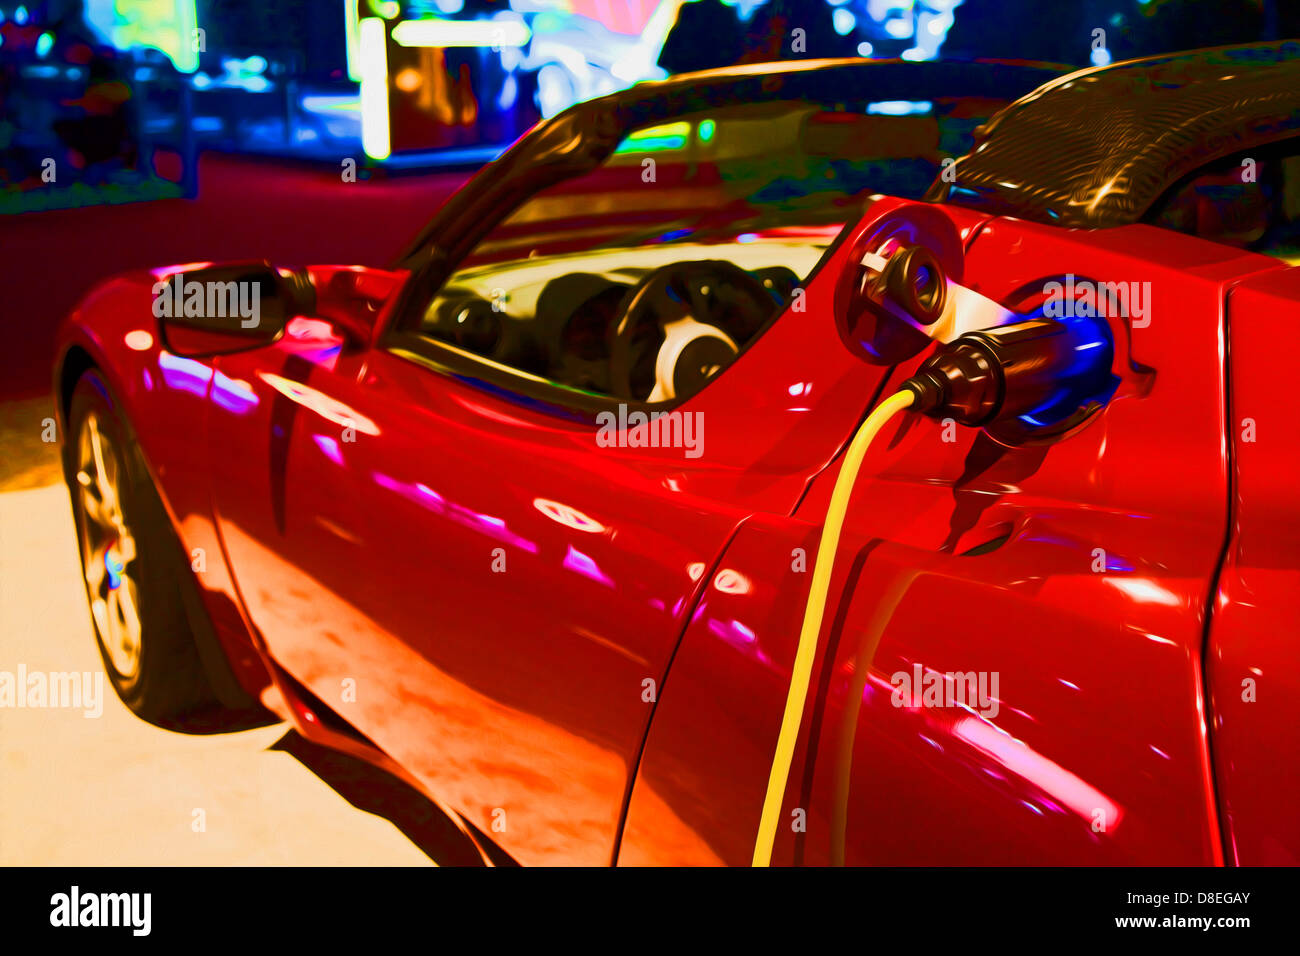 detroit-michigan-the-tesla-roadster-electric-vehicle-on-display-at